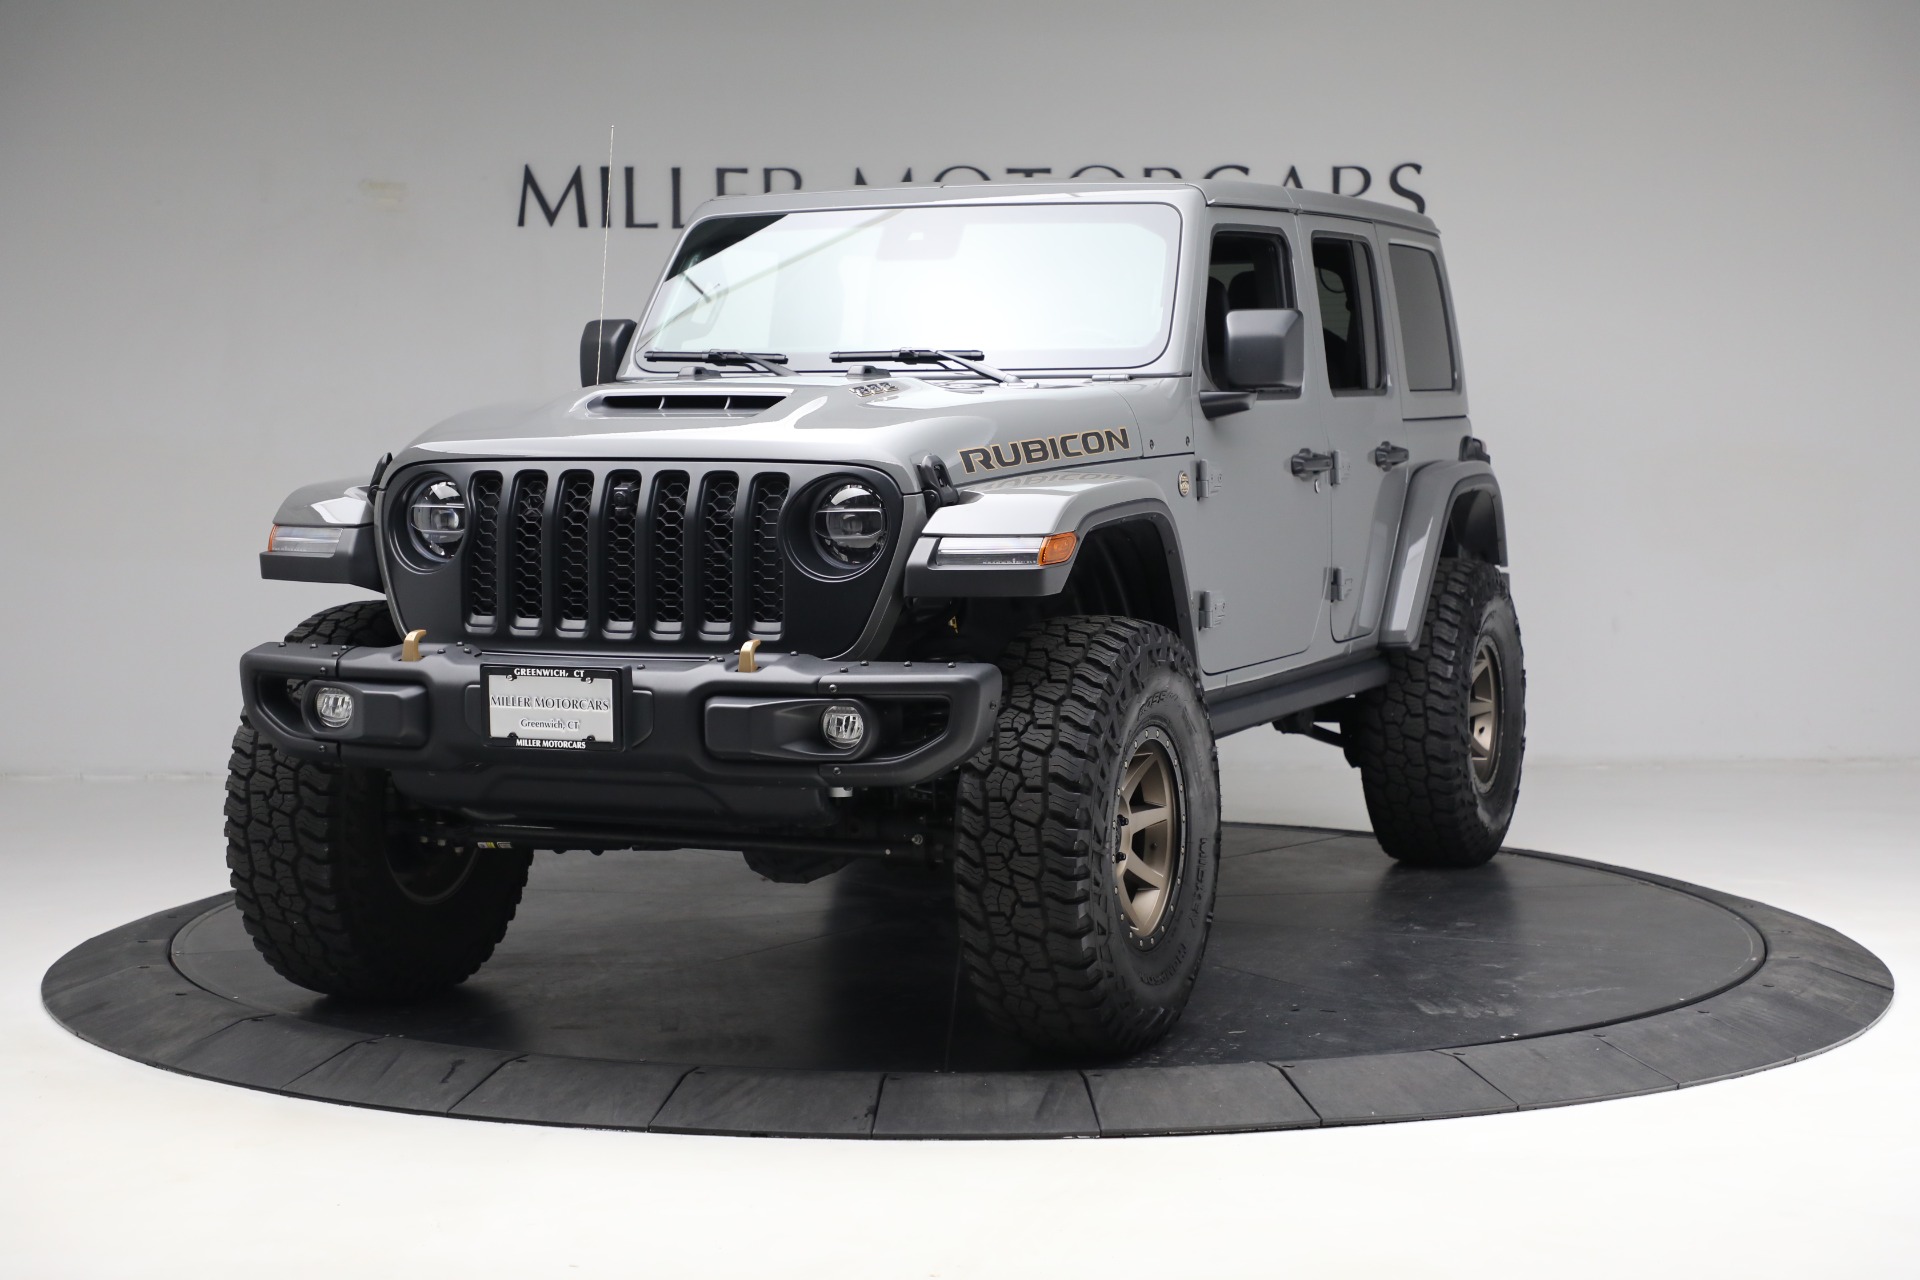 Used 2021 Jeep Wrangler Unlimited Rubicon 392 for sale $81,900 at Aston Martin of Greenwich in Greenwich CT 06830 1